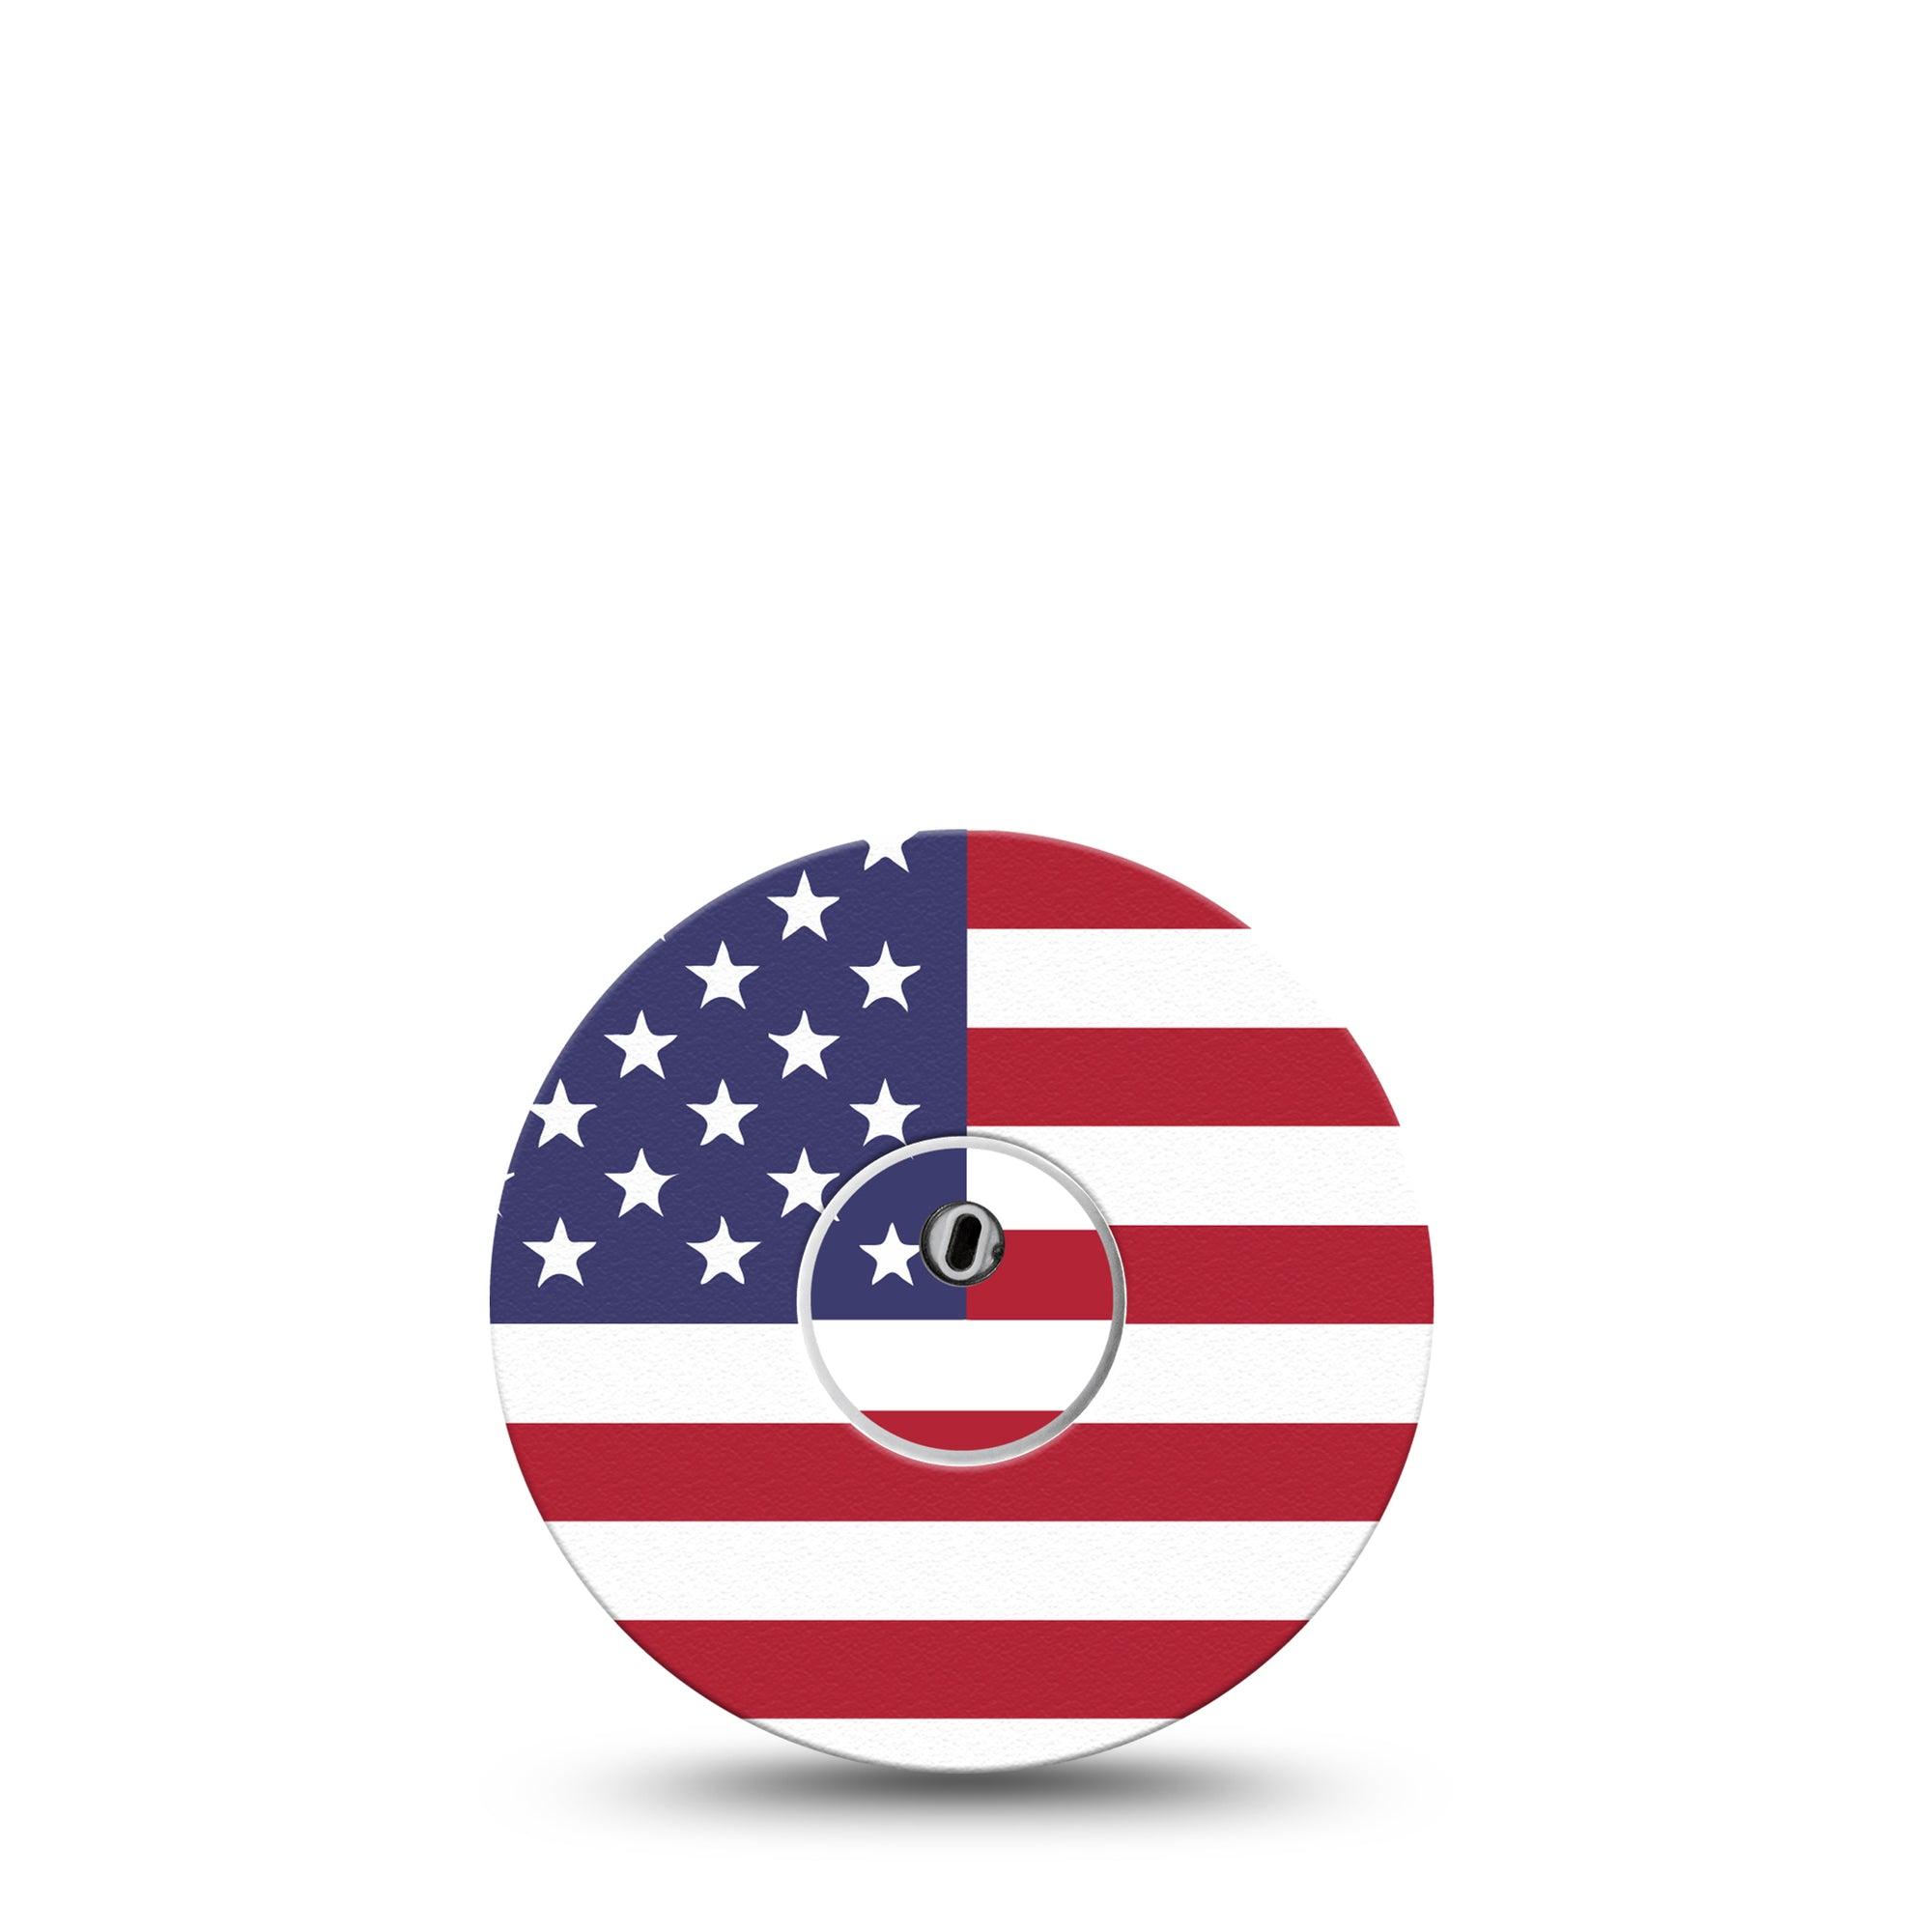 U.S Flag Libre 3 Transmitter Sticker, Single, Stars And Stripes Flag Themed, Libre 3 Vinyl Center Sticker, With Matching Libre 3 Tape, CGM Overlay Patch Design